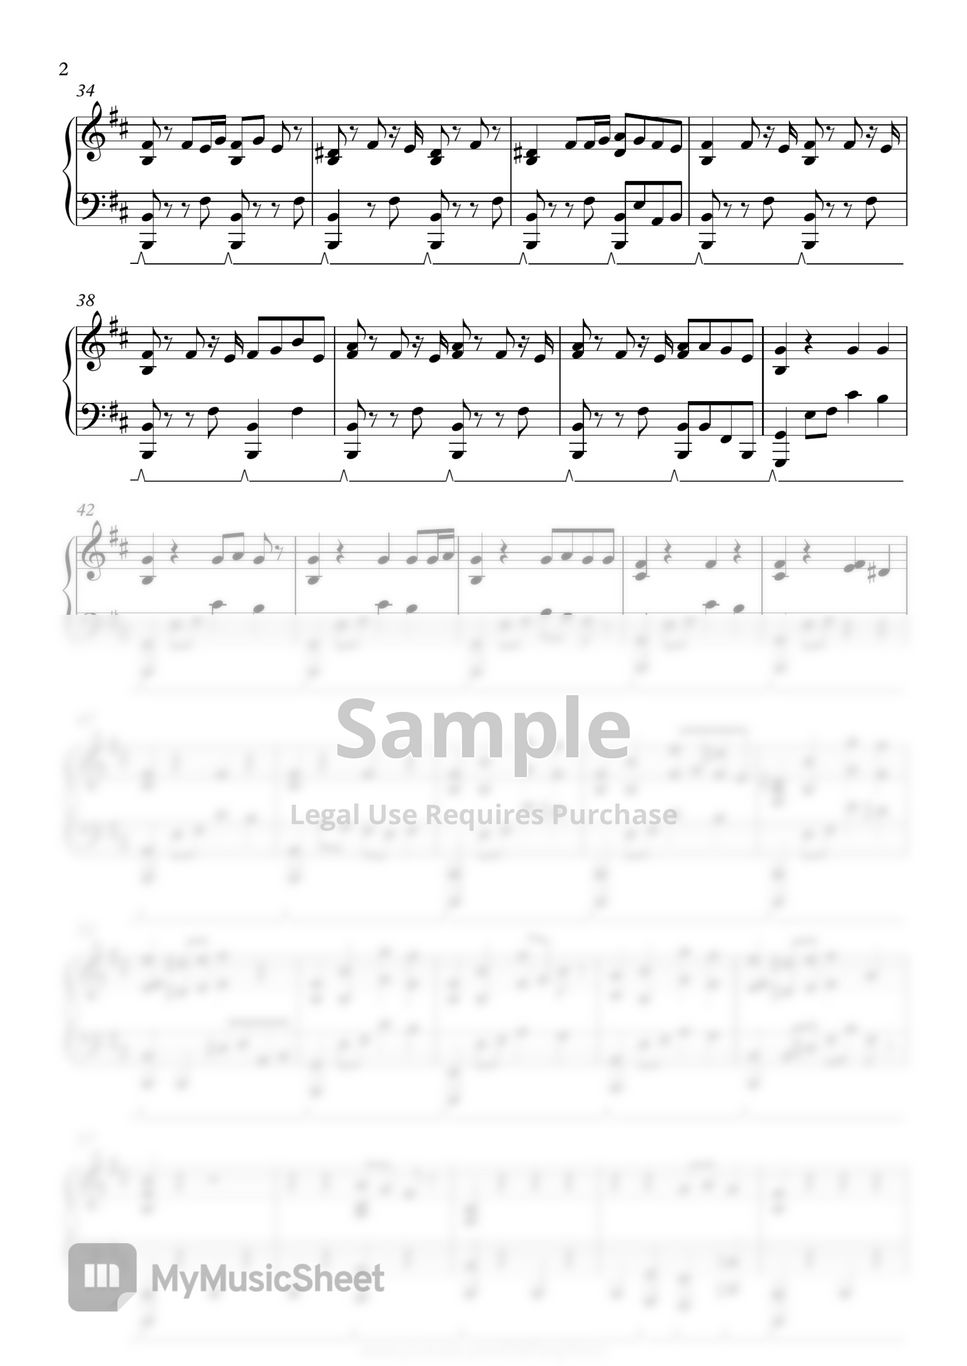 (Piano Sheet) - Ori and the Will of the Wisps 8 Songs Medley by oldtang